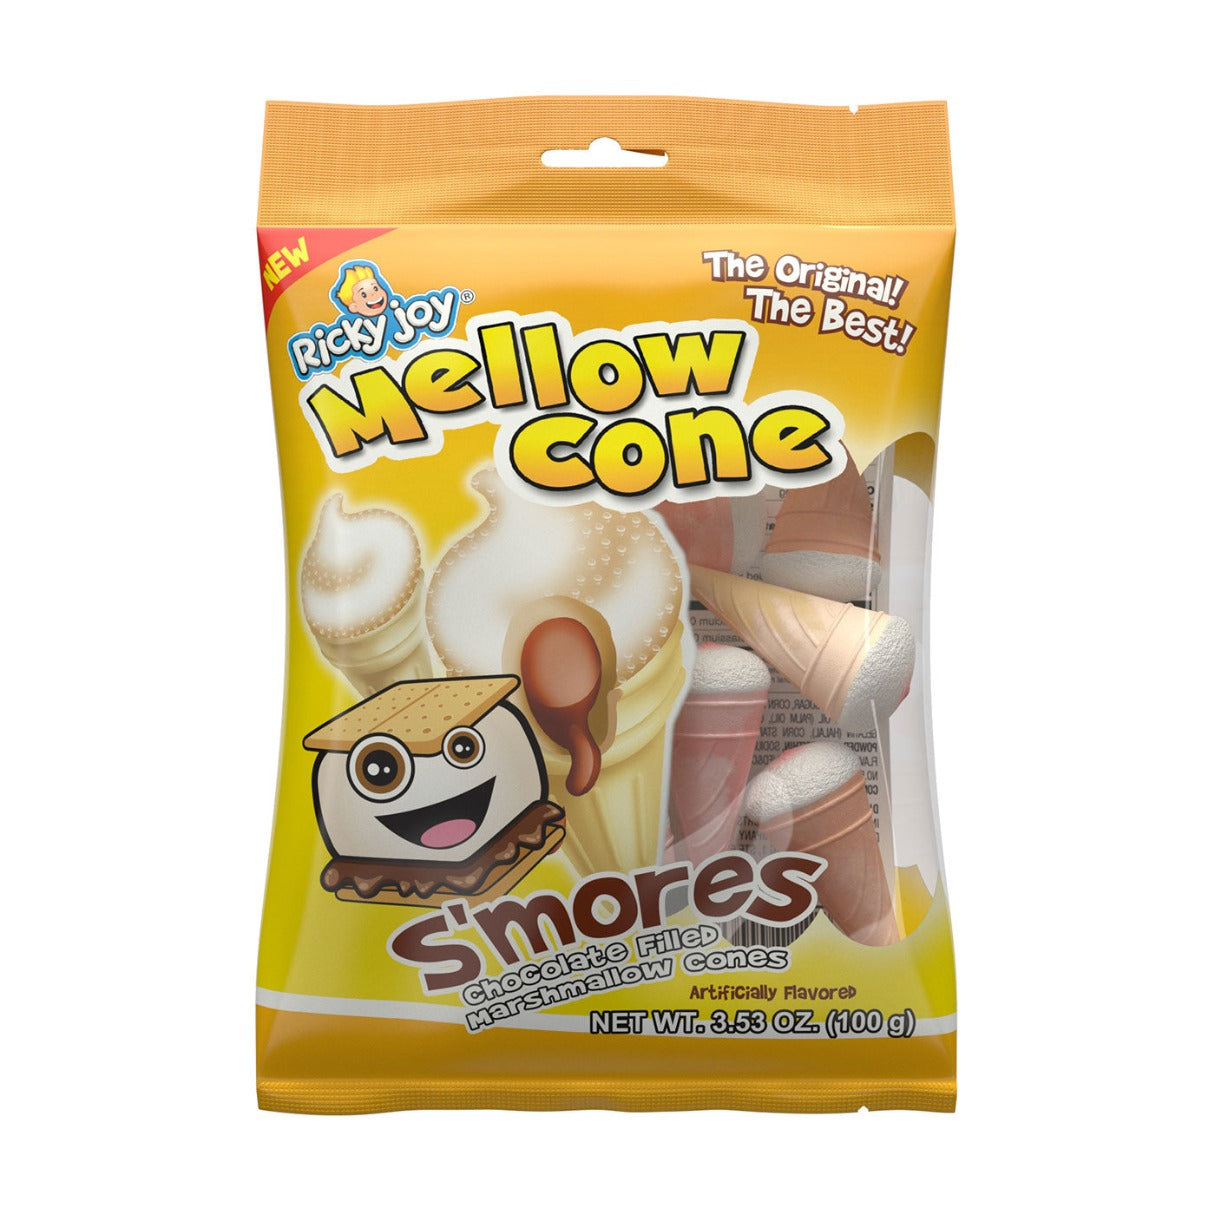 Ricky Joy Mellow Cones S'mores Chocolate Filled Marshmallow Cones 3.53oz - 18ct